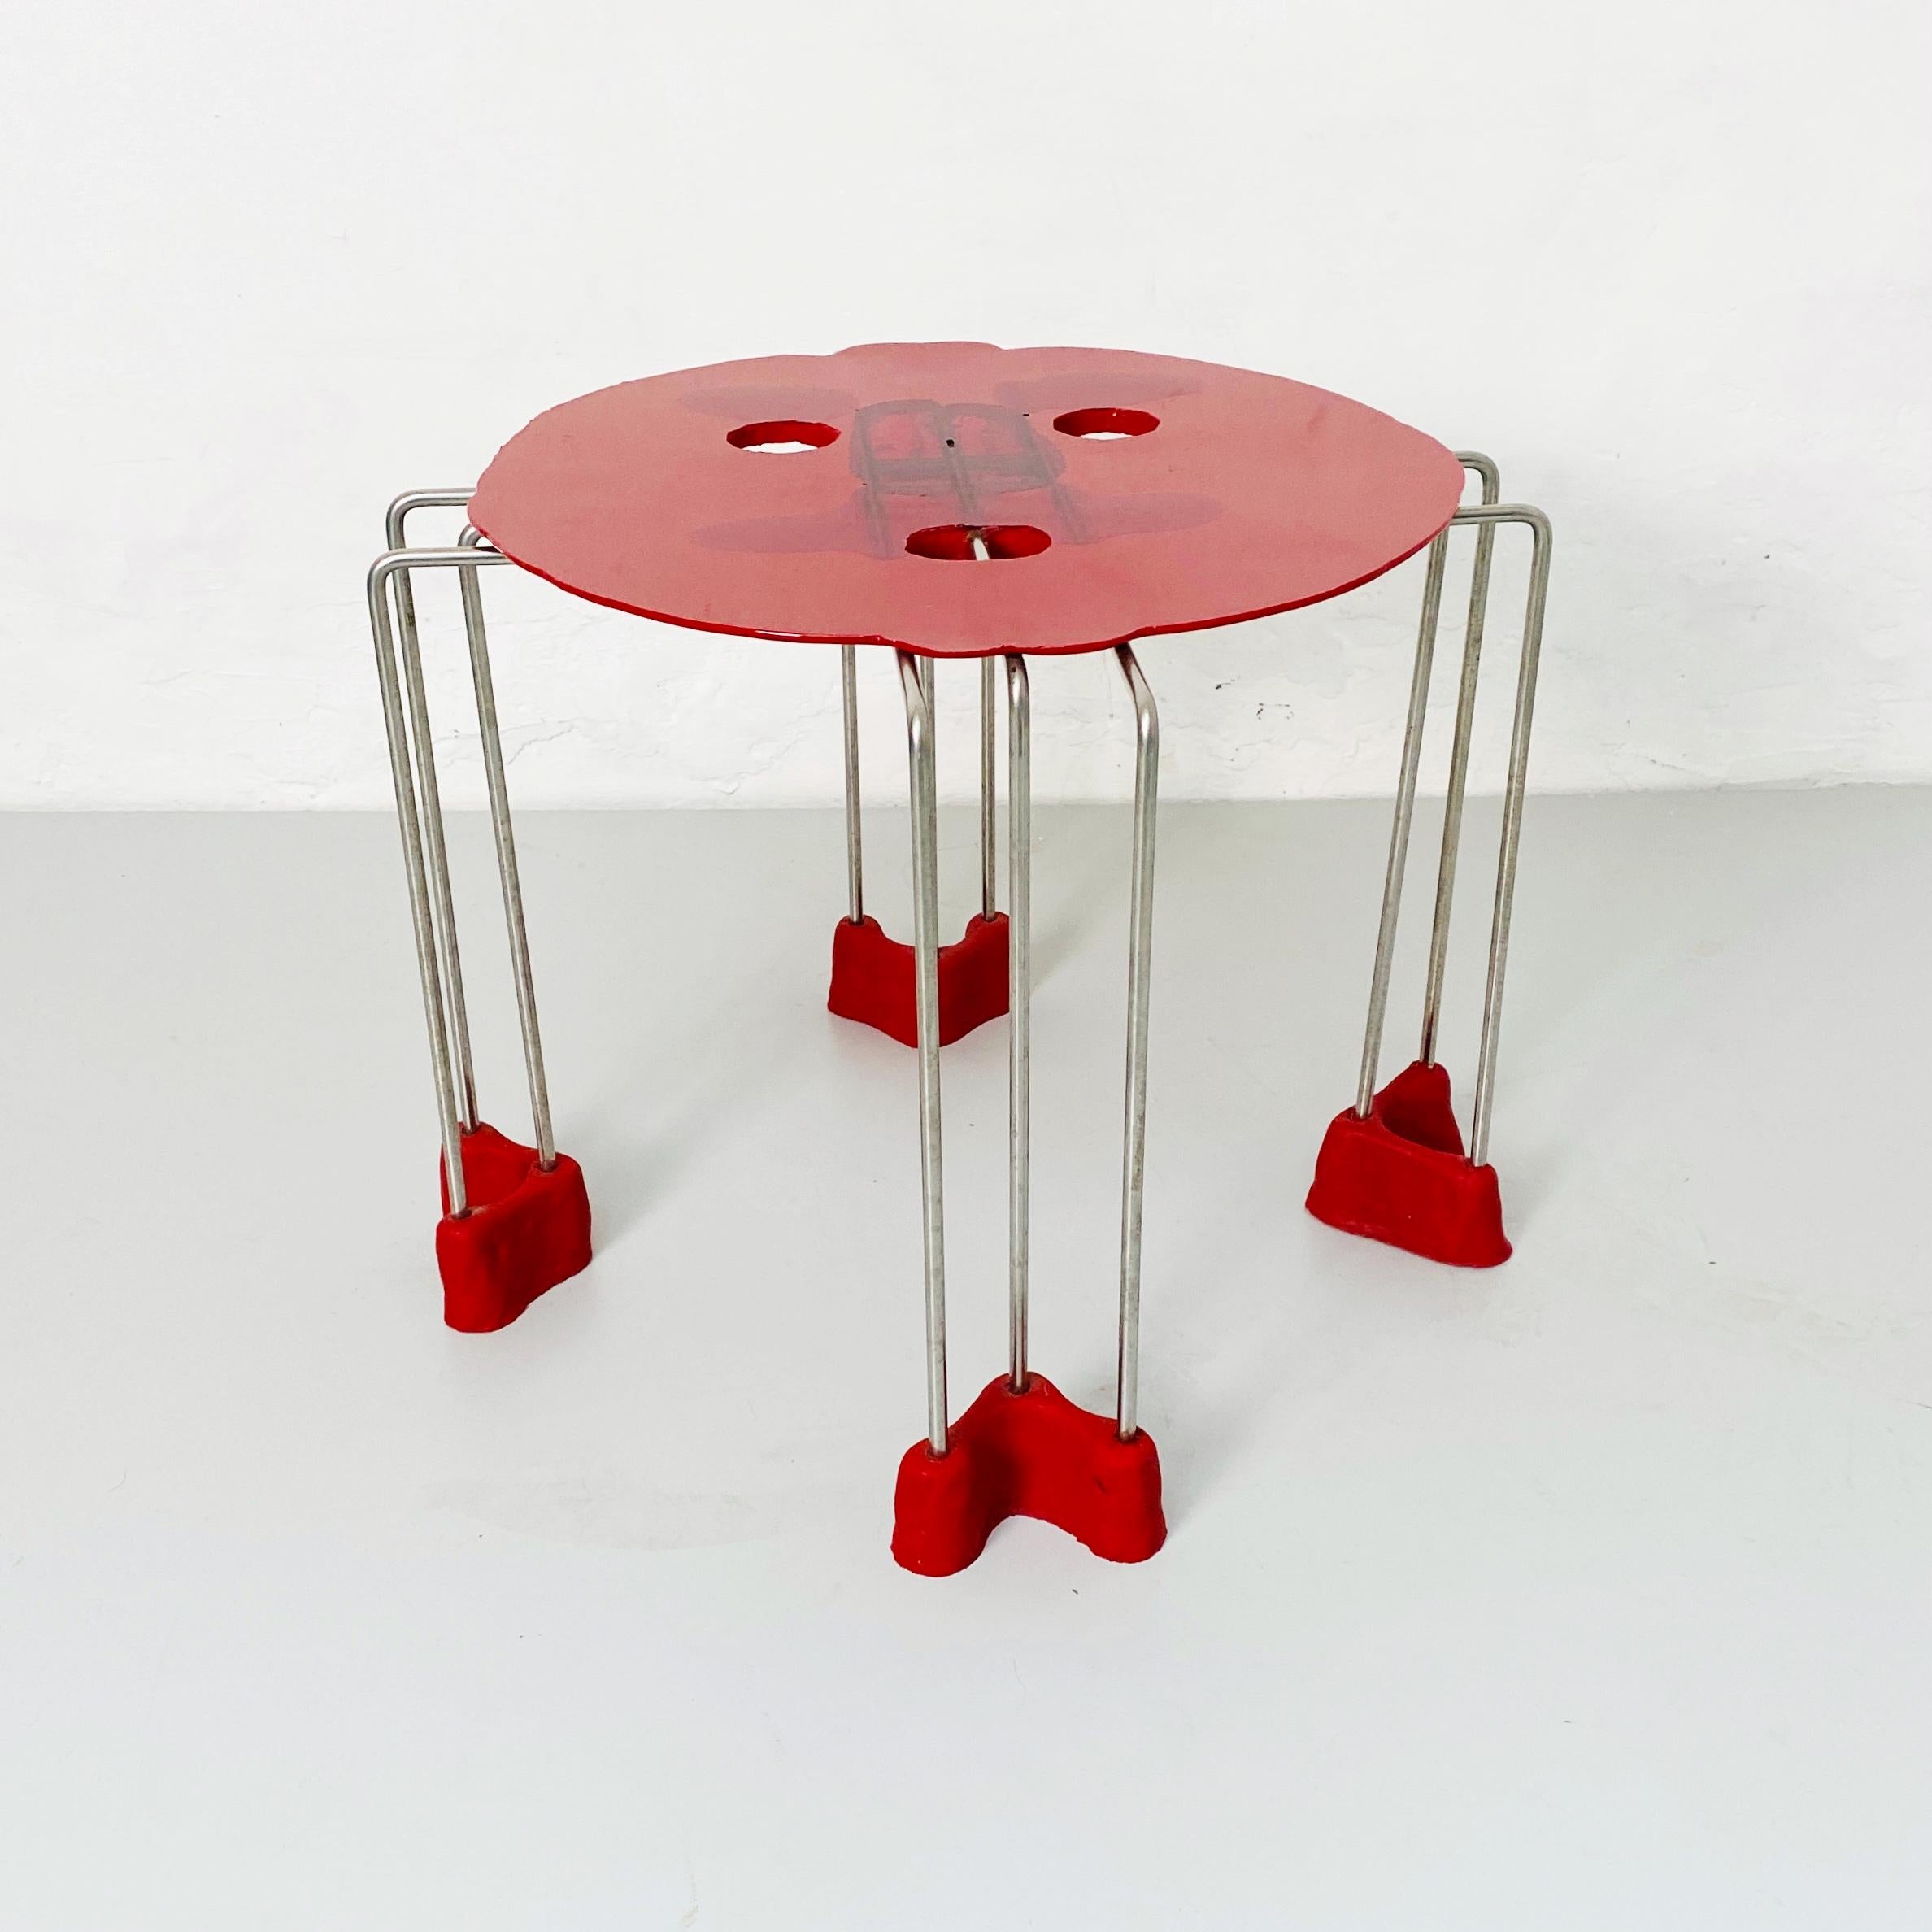 Contemporary Italian Modern Triple Play Resin Stool by Gaetano Pesce for Fish Design, 2000s For Sale